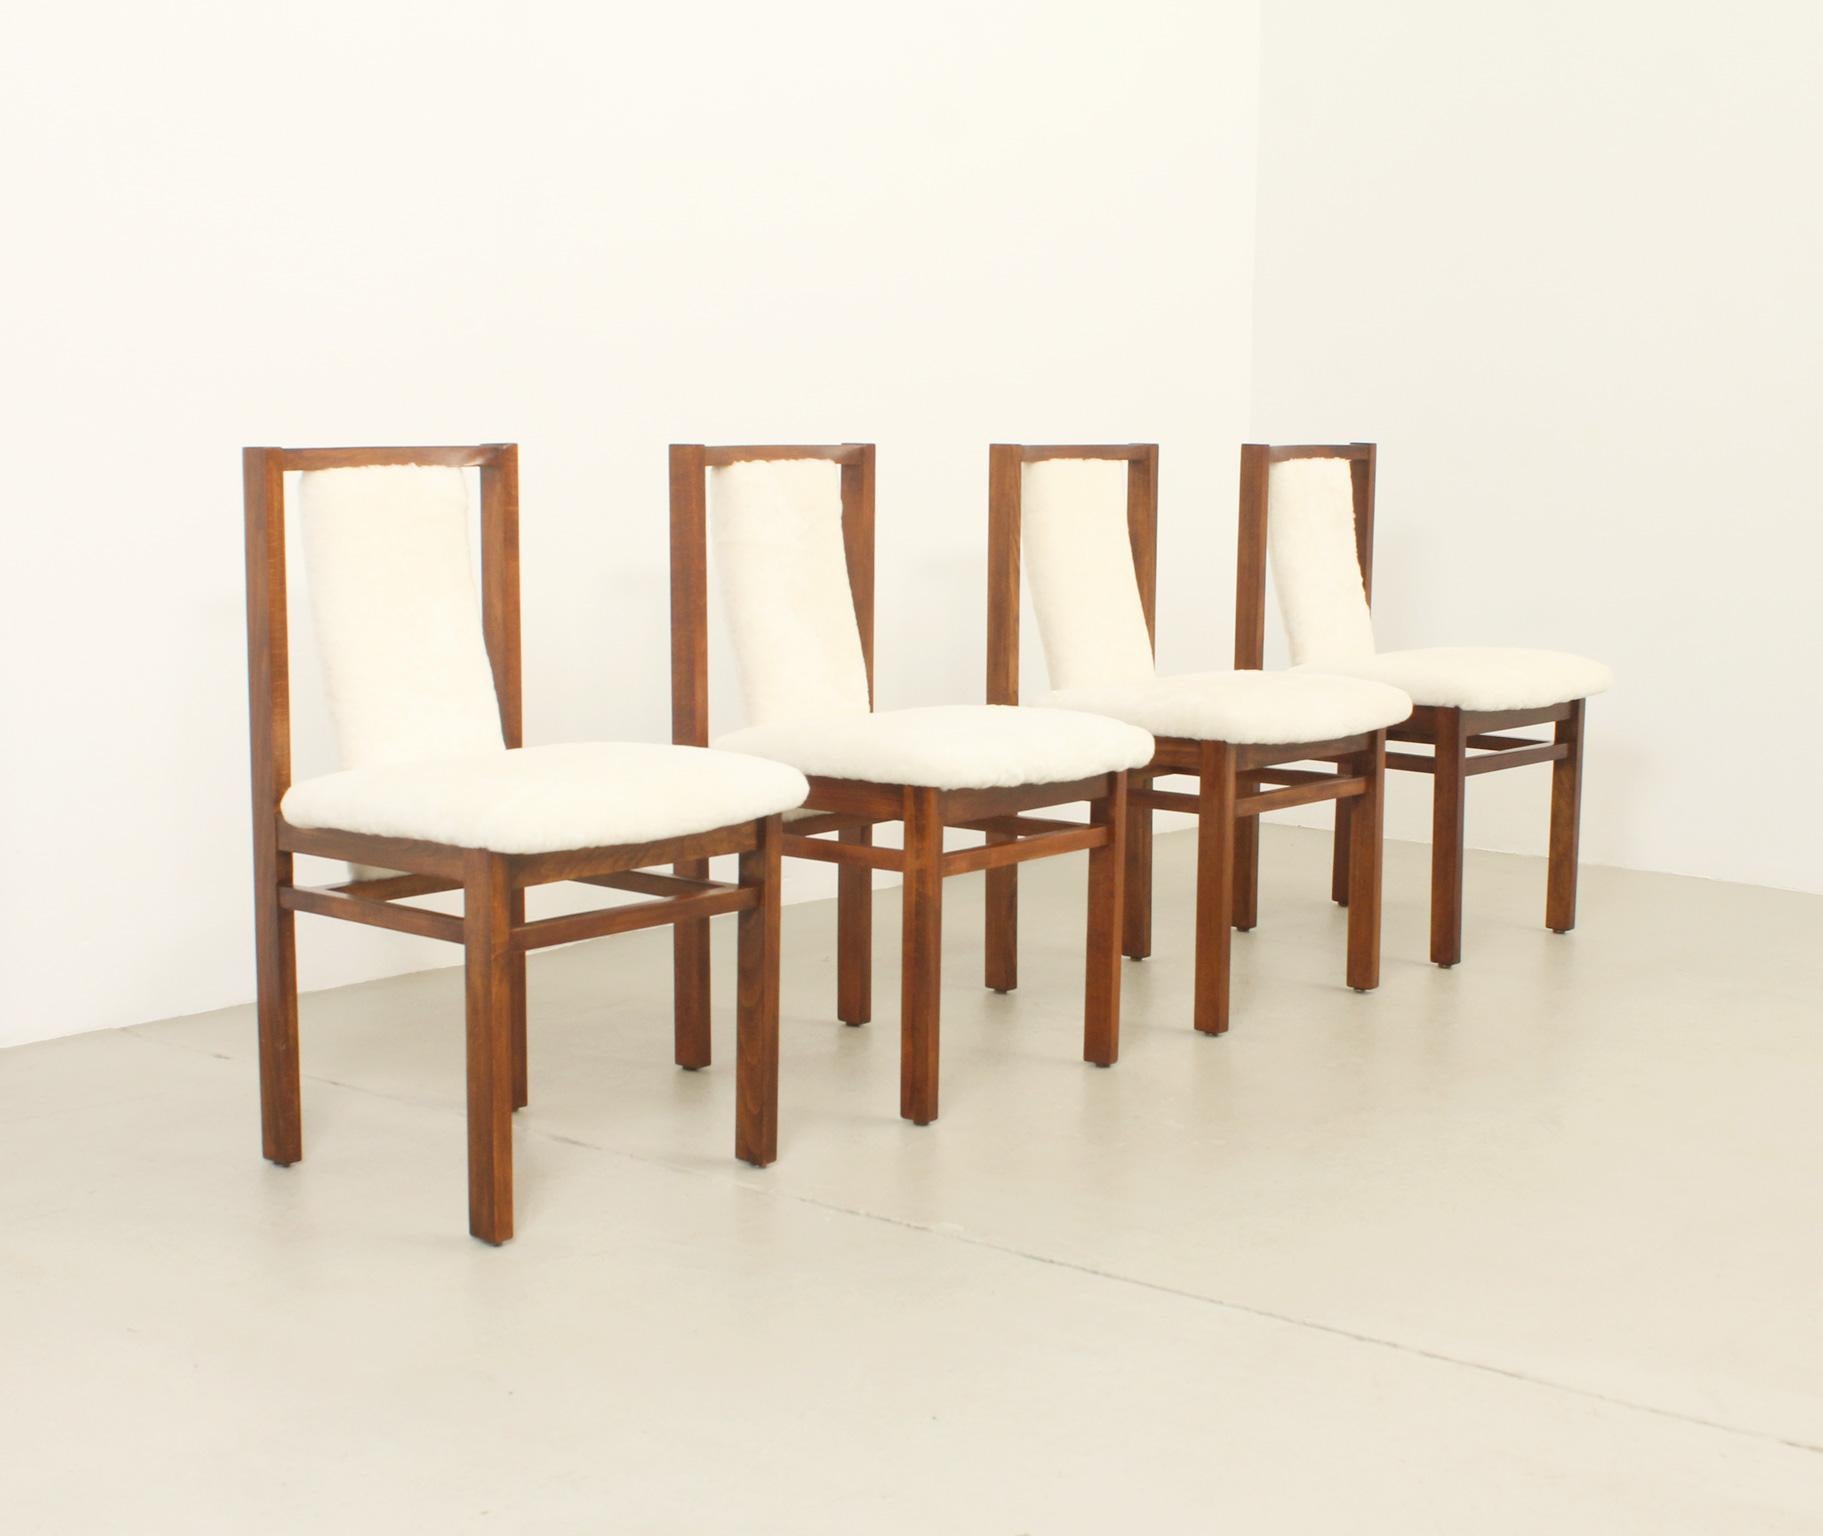 Spanish Four Dining Chairs by Jordi Vilanova in Oak Wood and Sheepskin, Spain, 1960's For Sale